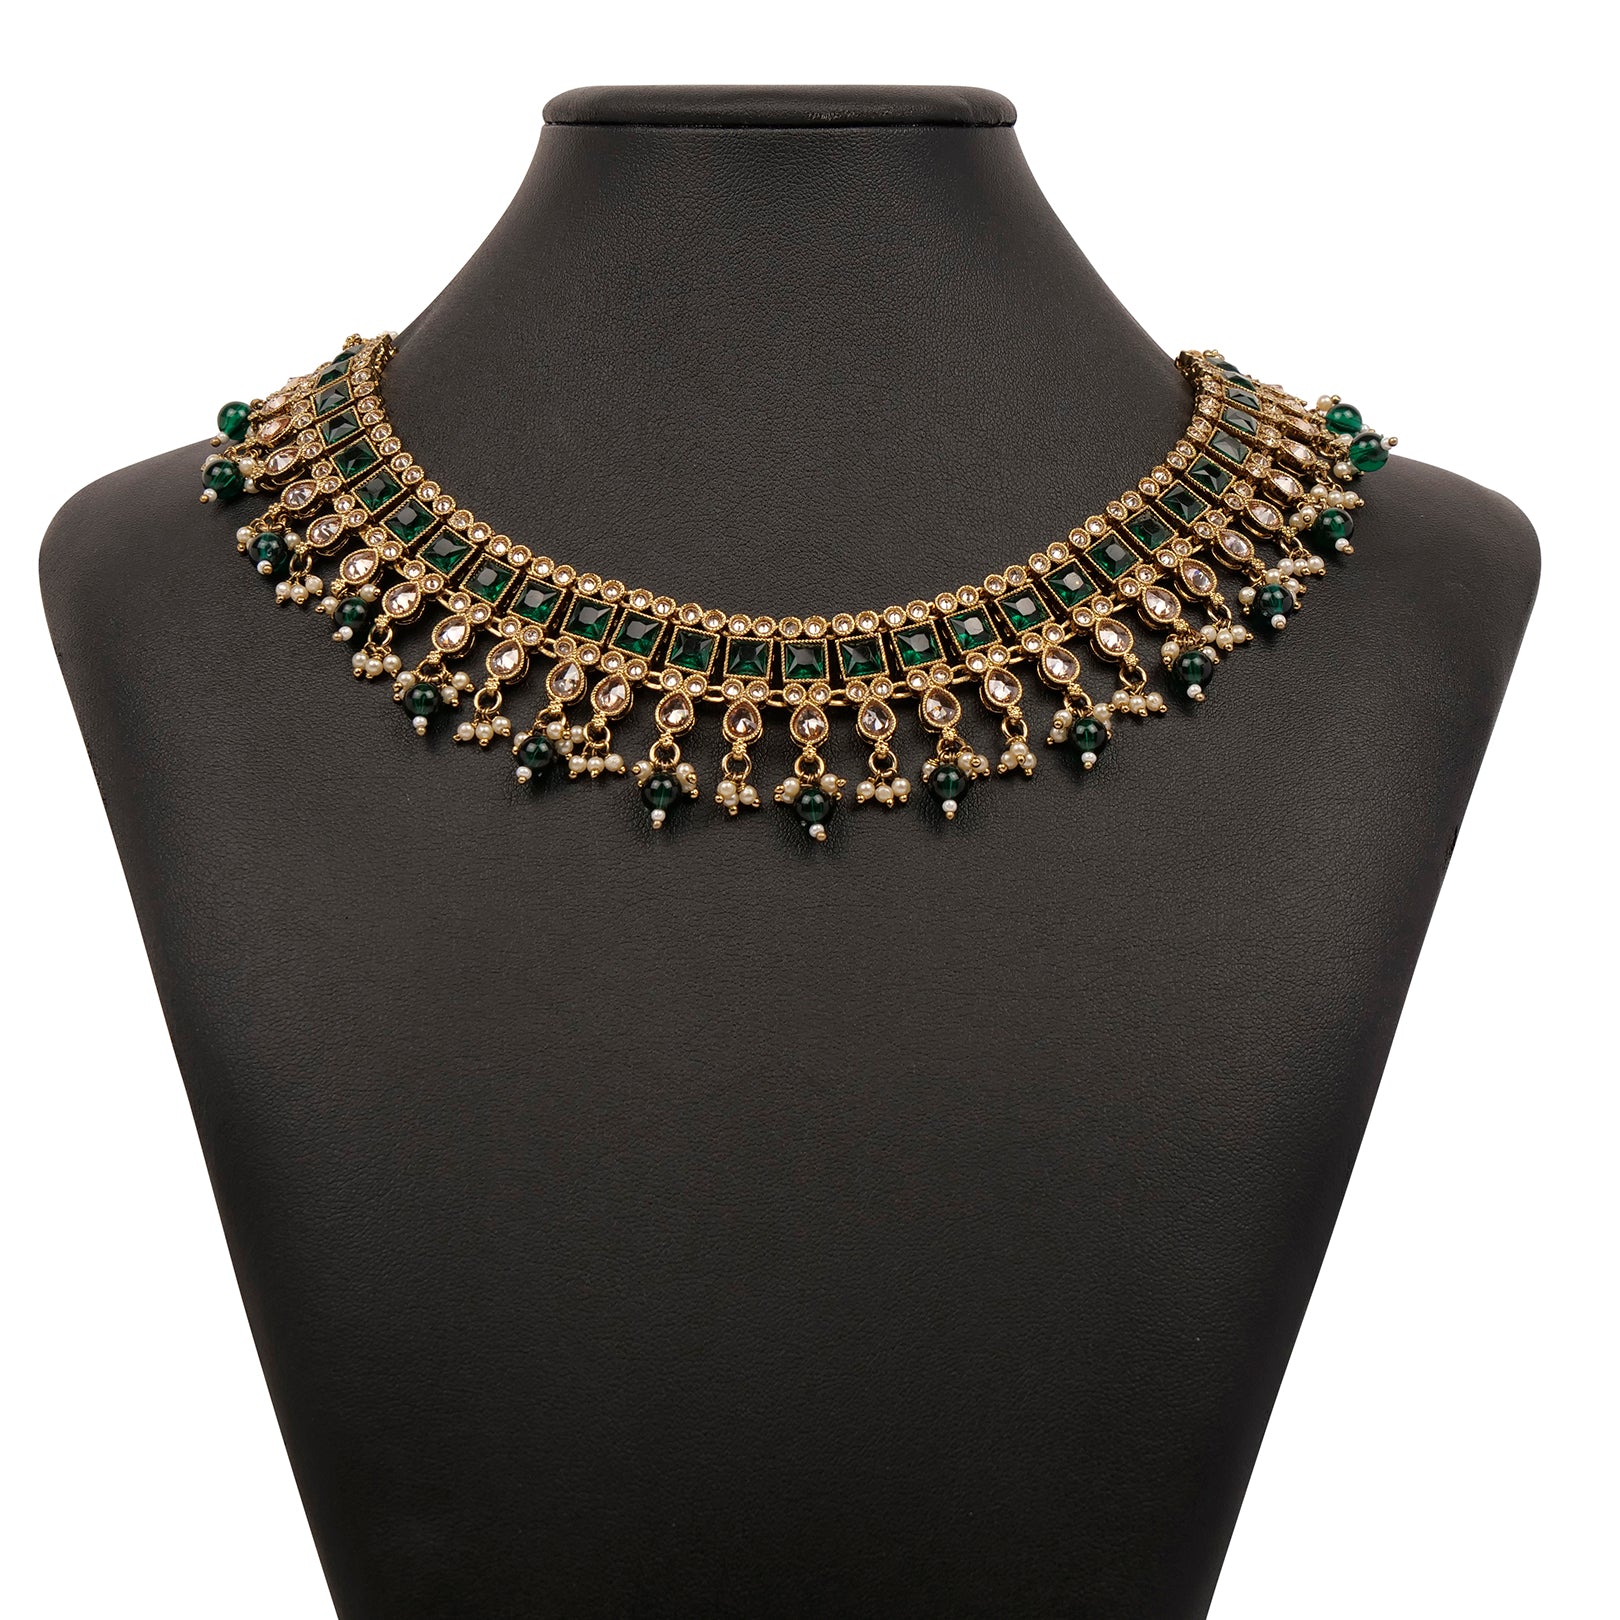 Sana Necklace Set in Green and Antique Gold